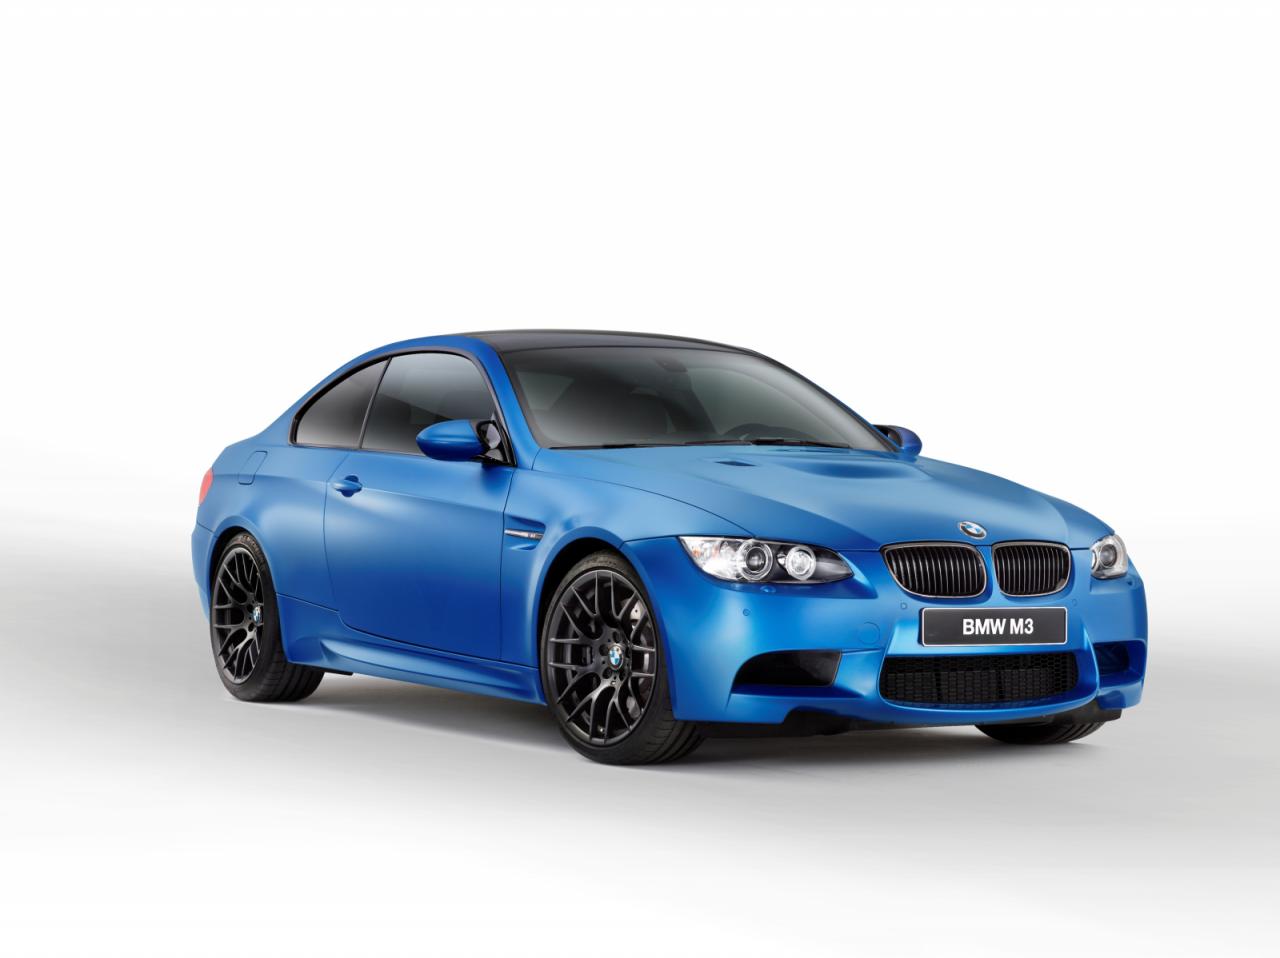 BMW Launches M3 Coupe Frozen Limited Edition for U.S. – Red, White, Blue